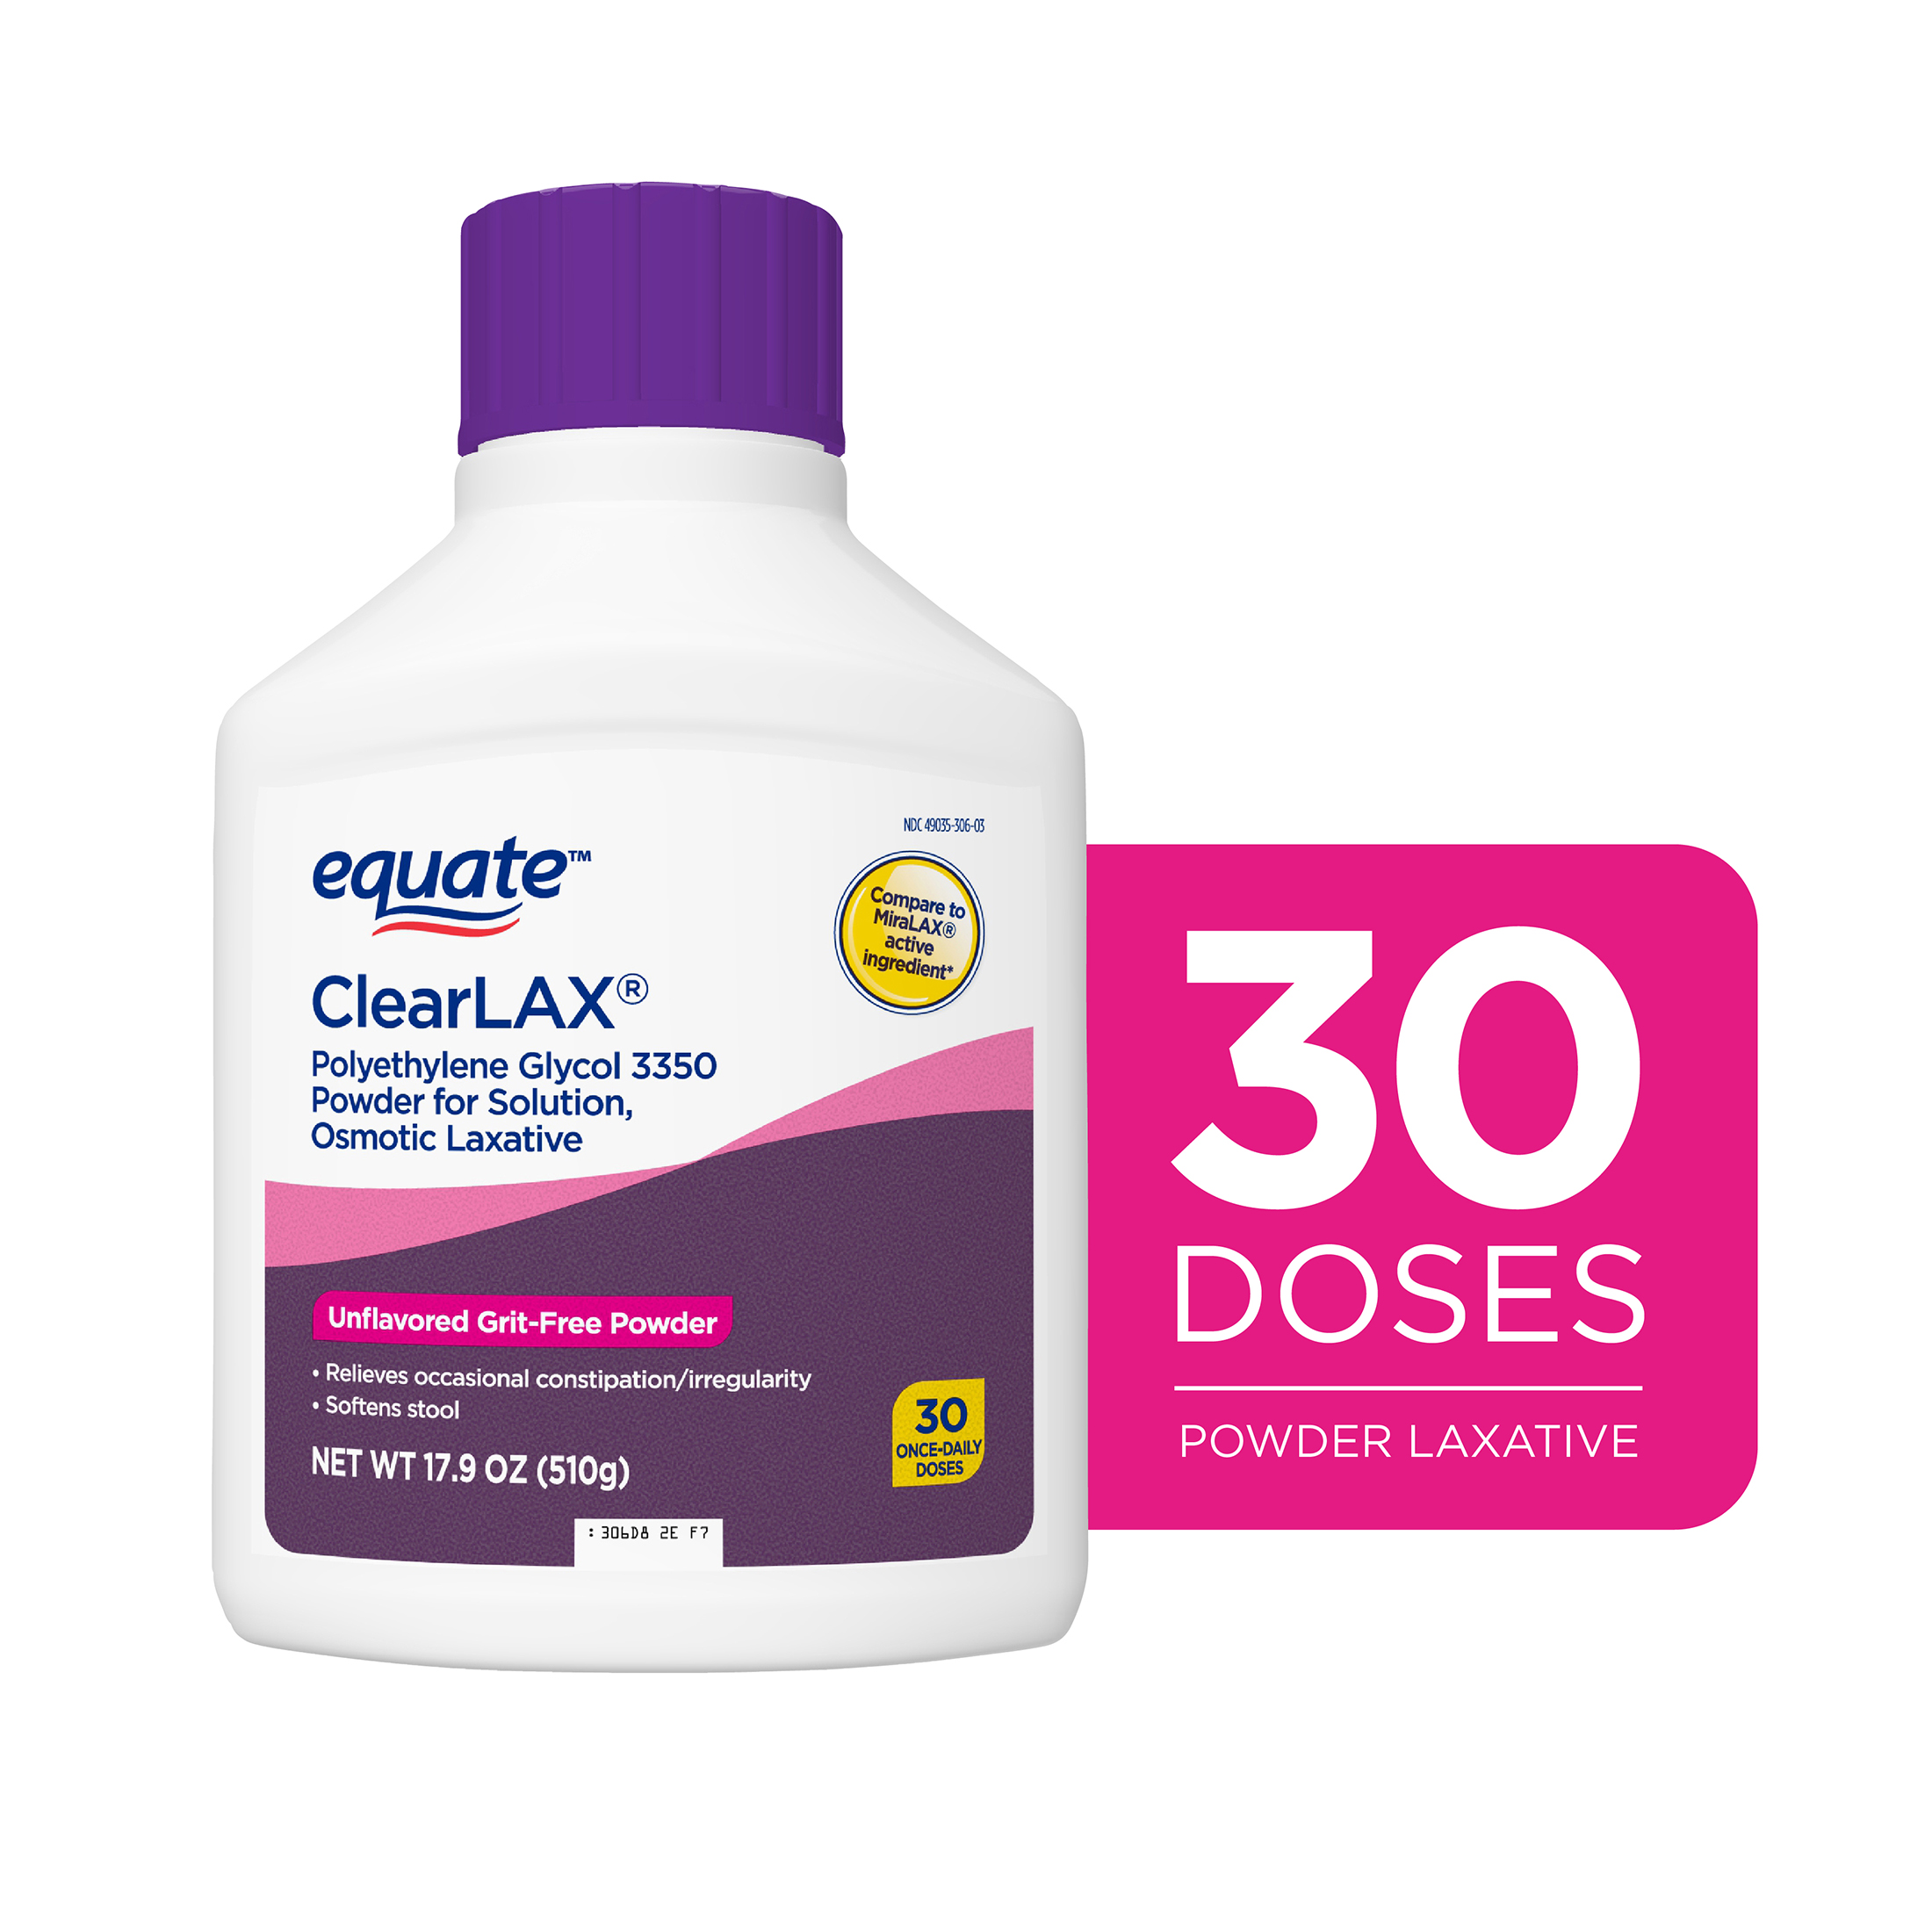 Equate ClearLax Polyethylene Glycol 3350 Powder for Solution, Unflavored, 30 Doses - image 1 of 7